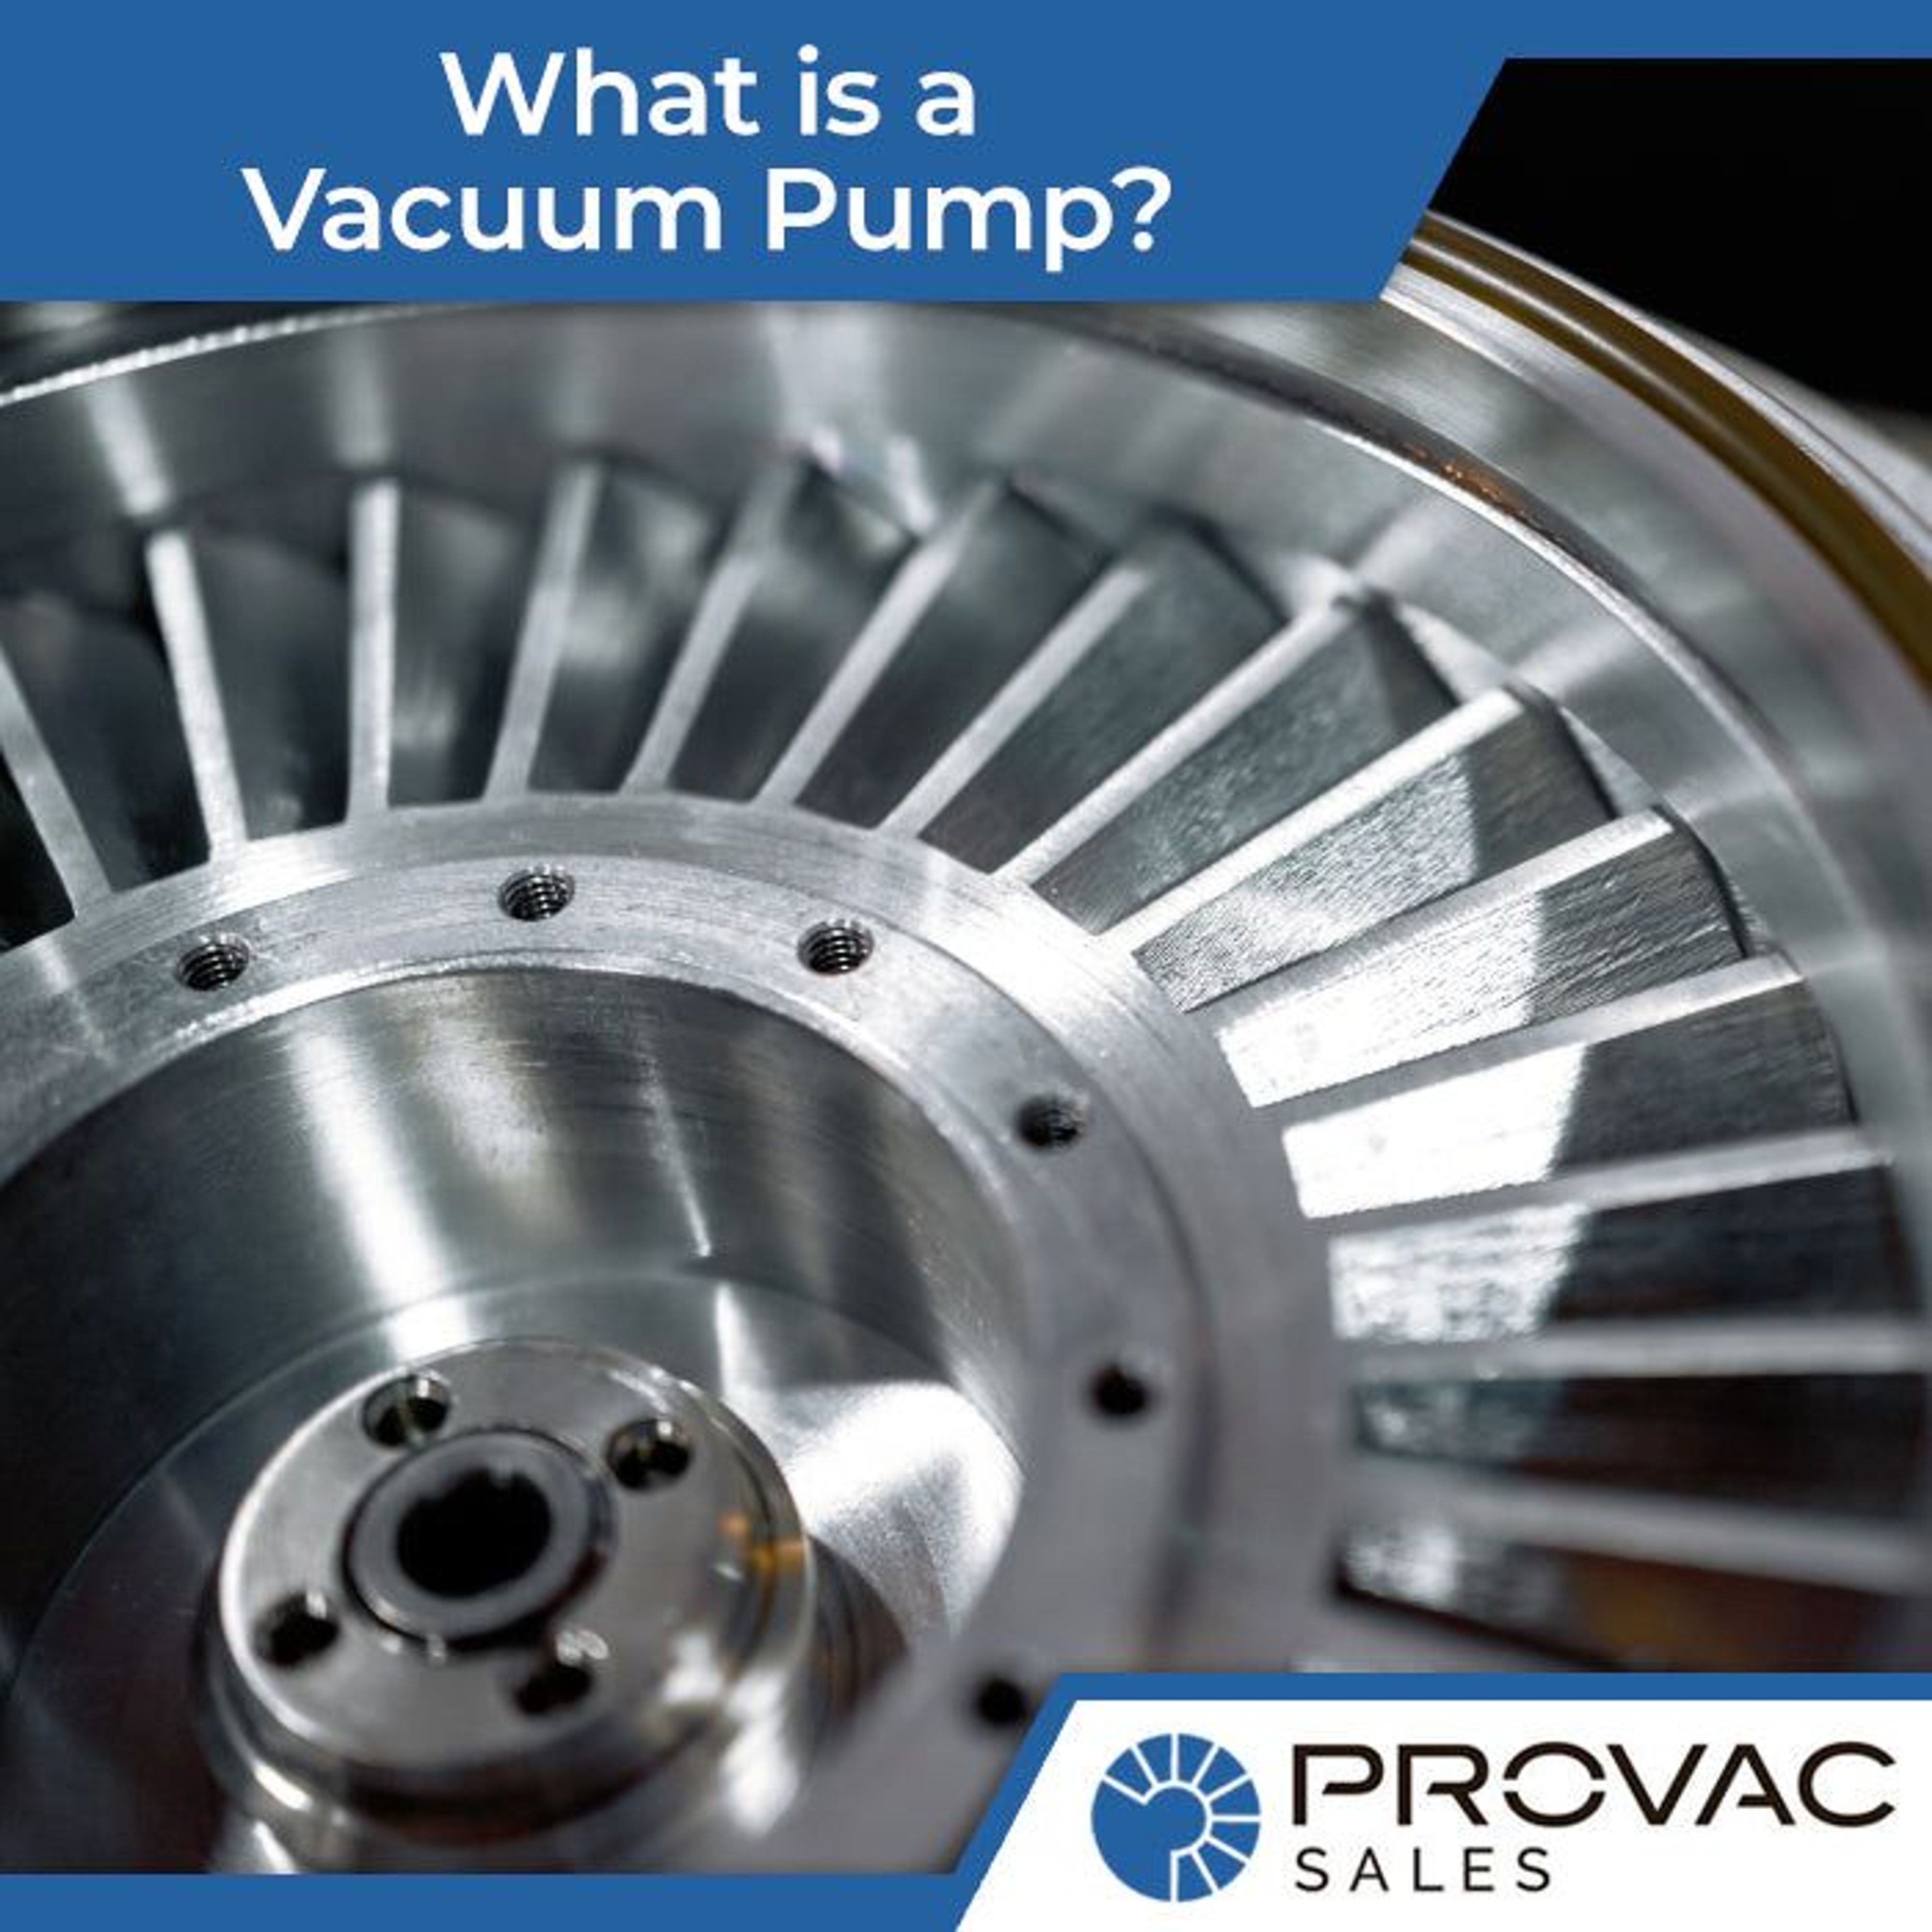 What Is a Vacuum Pump? Detailed Introduction & Terminology Background